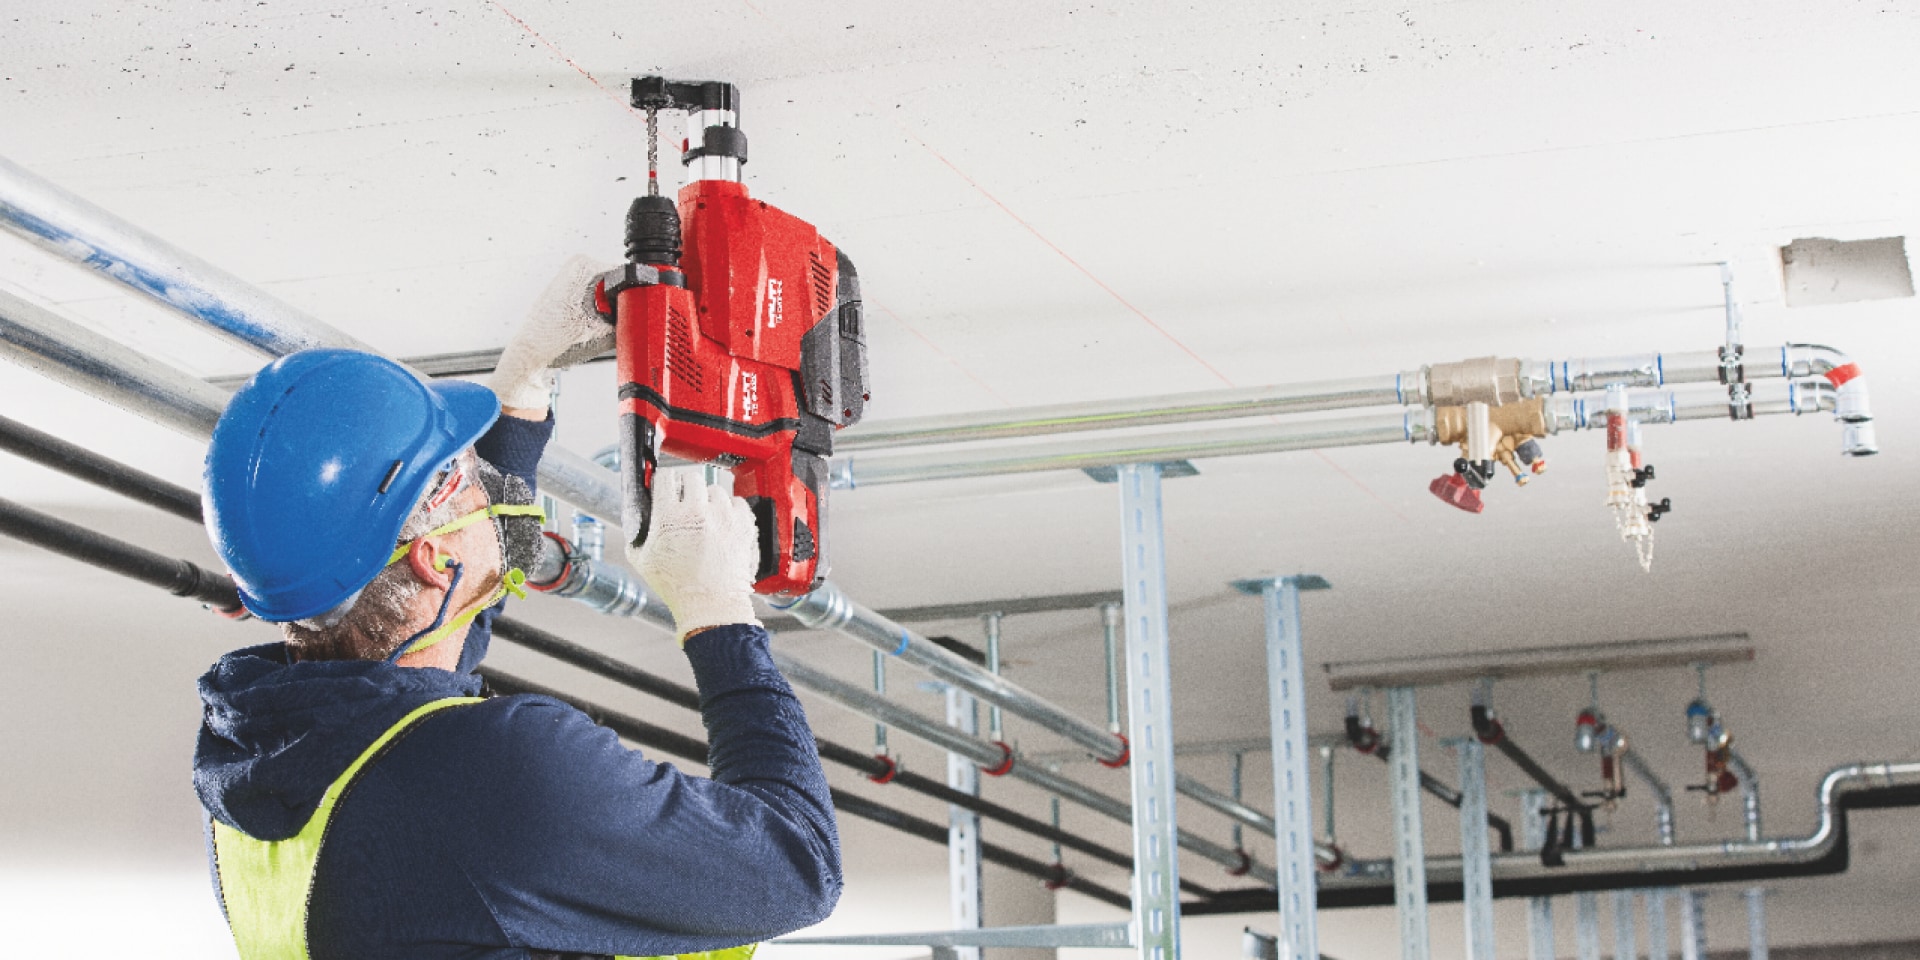 TE 6-A22 cordless rotary hammer being used with an integrated dust removal system